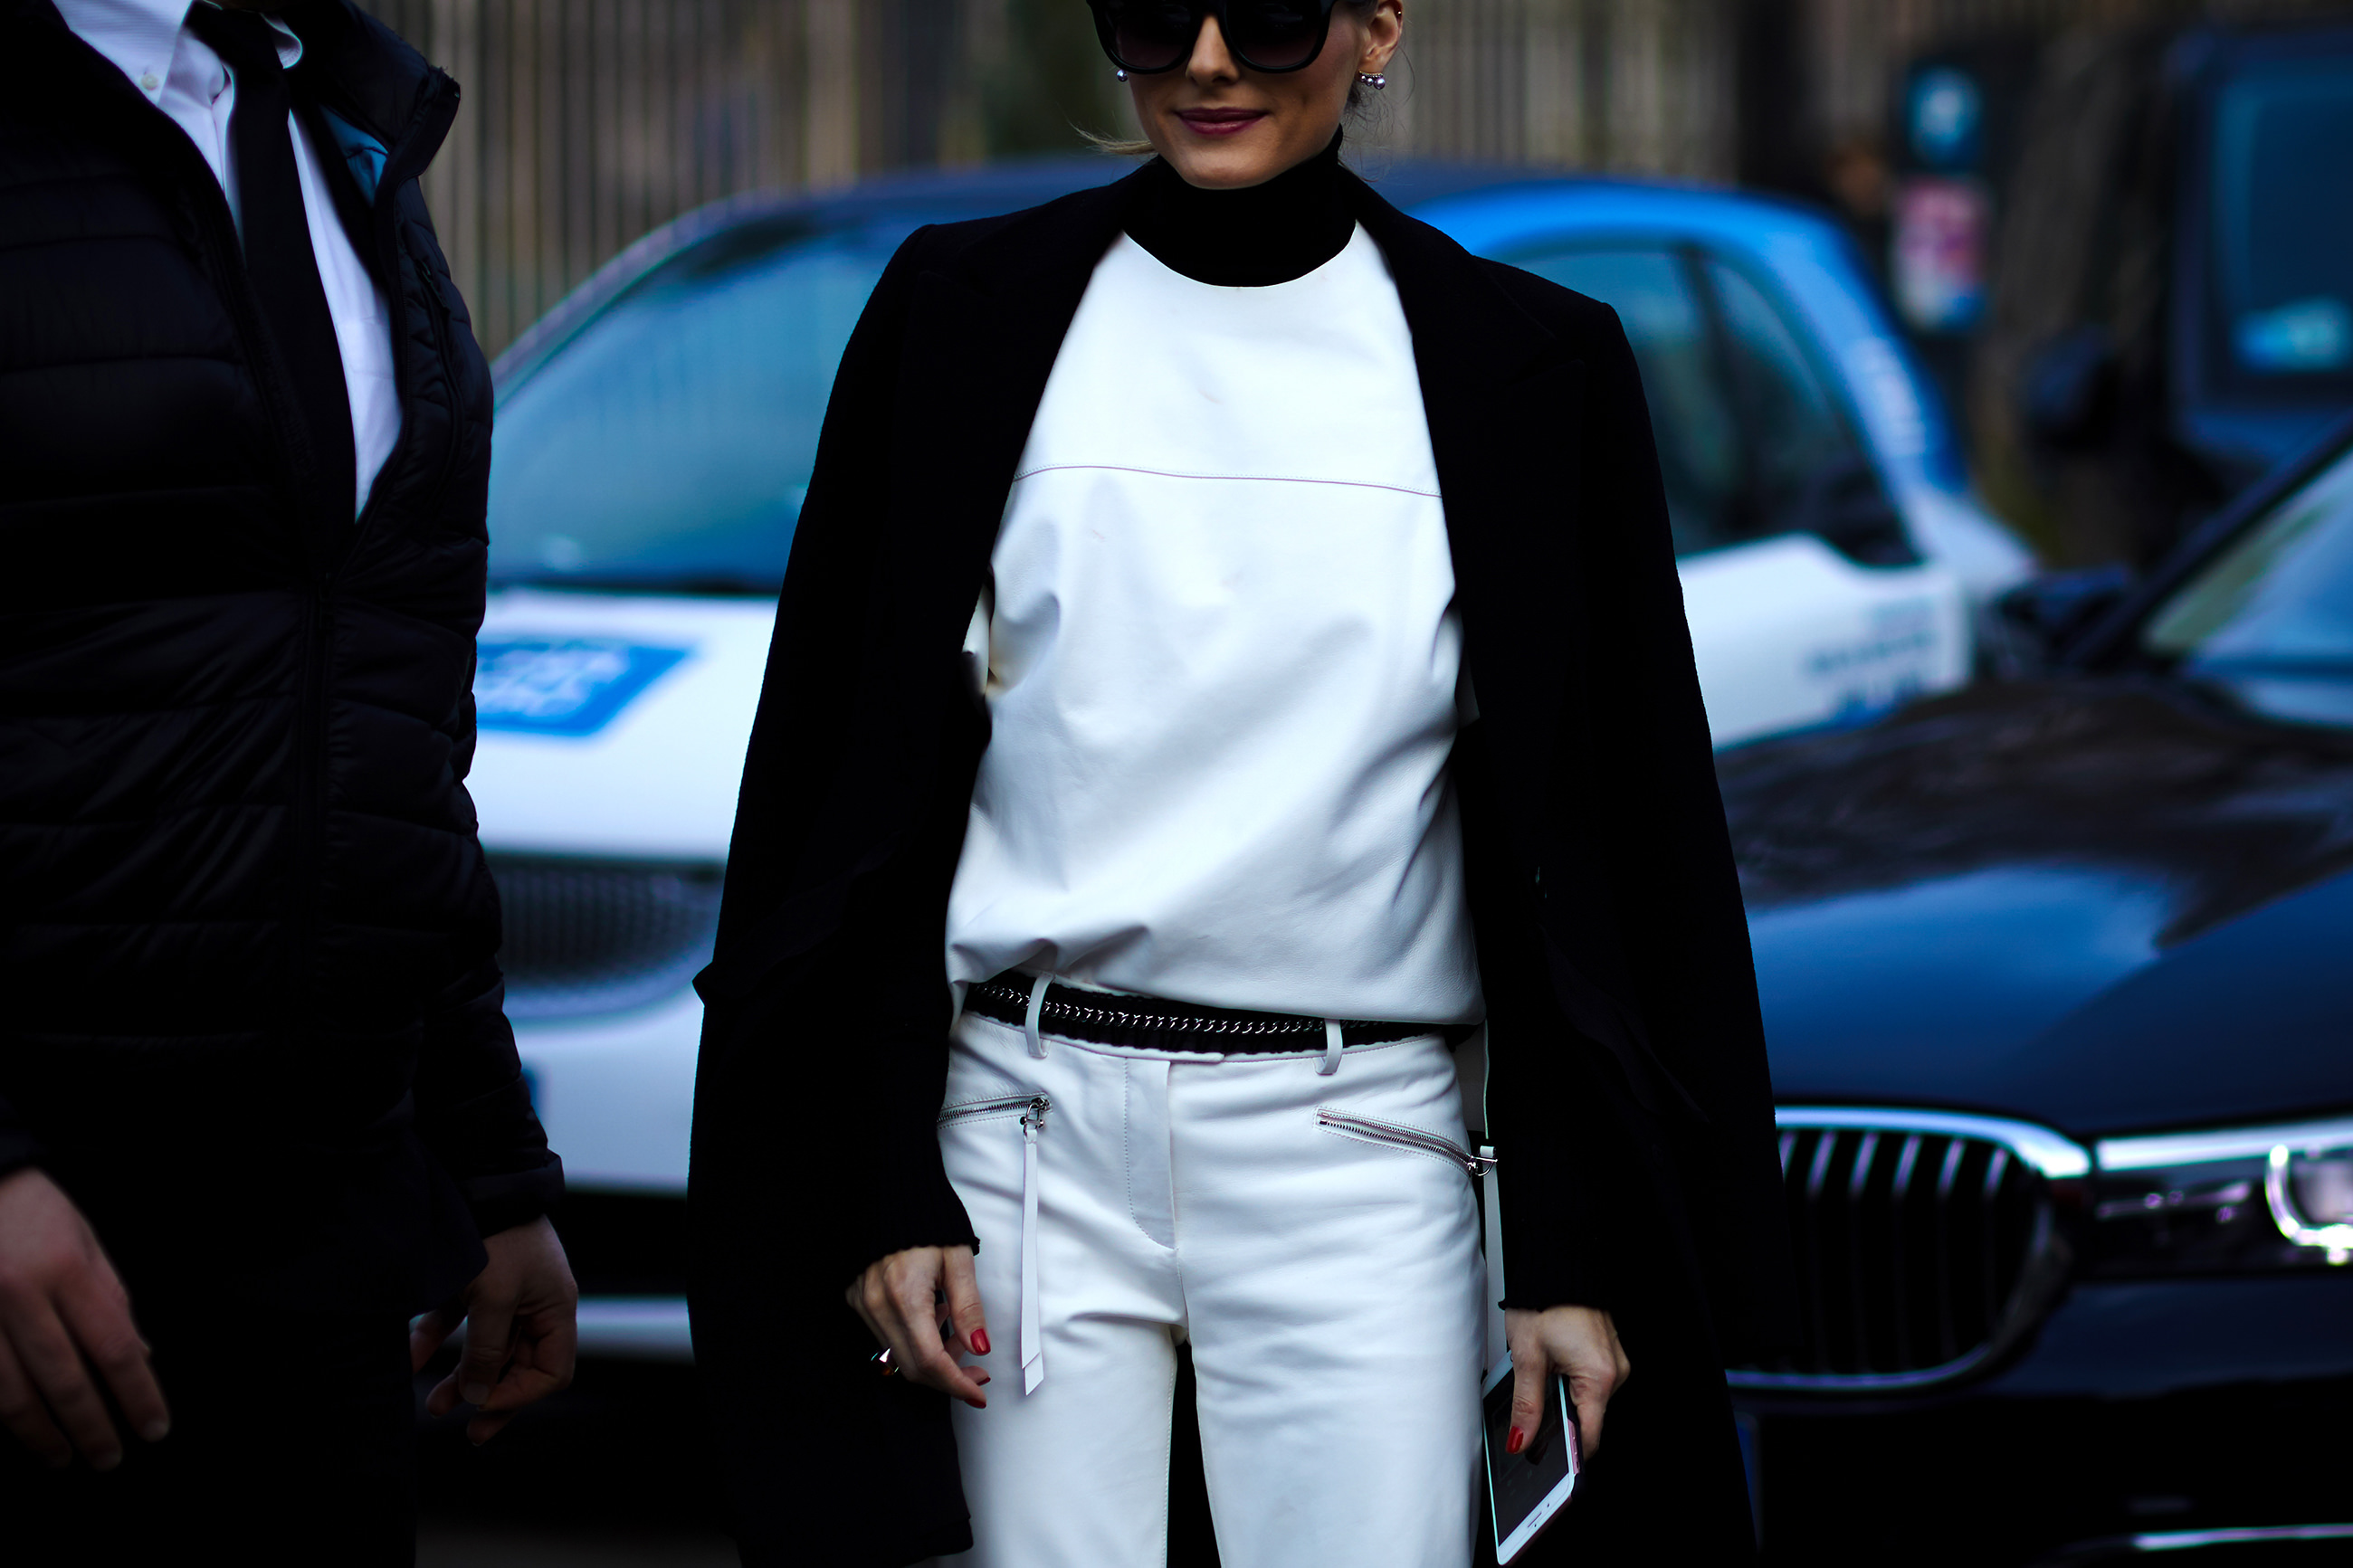 Olivia Palermo wearing white leather pants and top and black coat after a fashion show in Milan, Italy